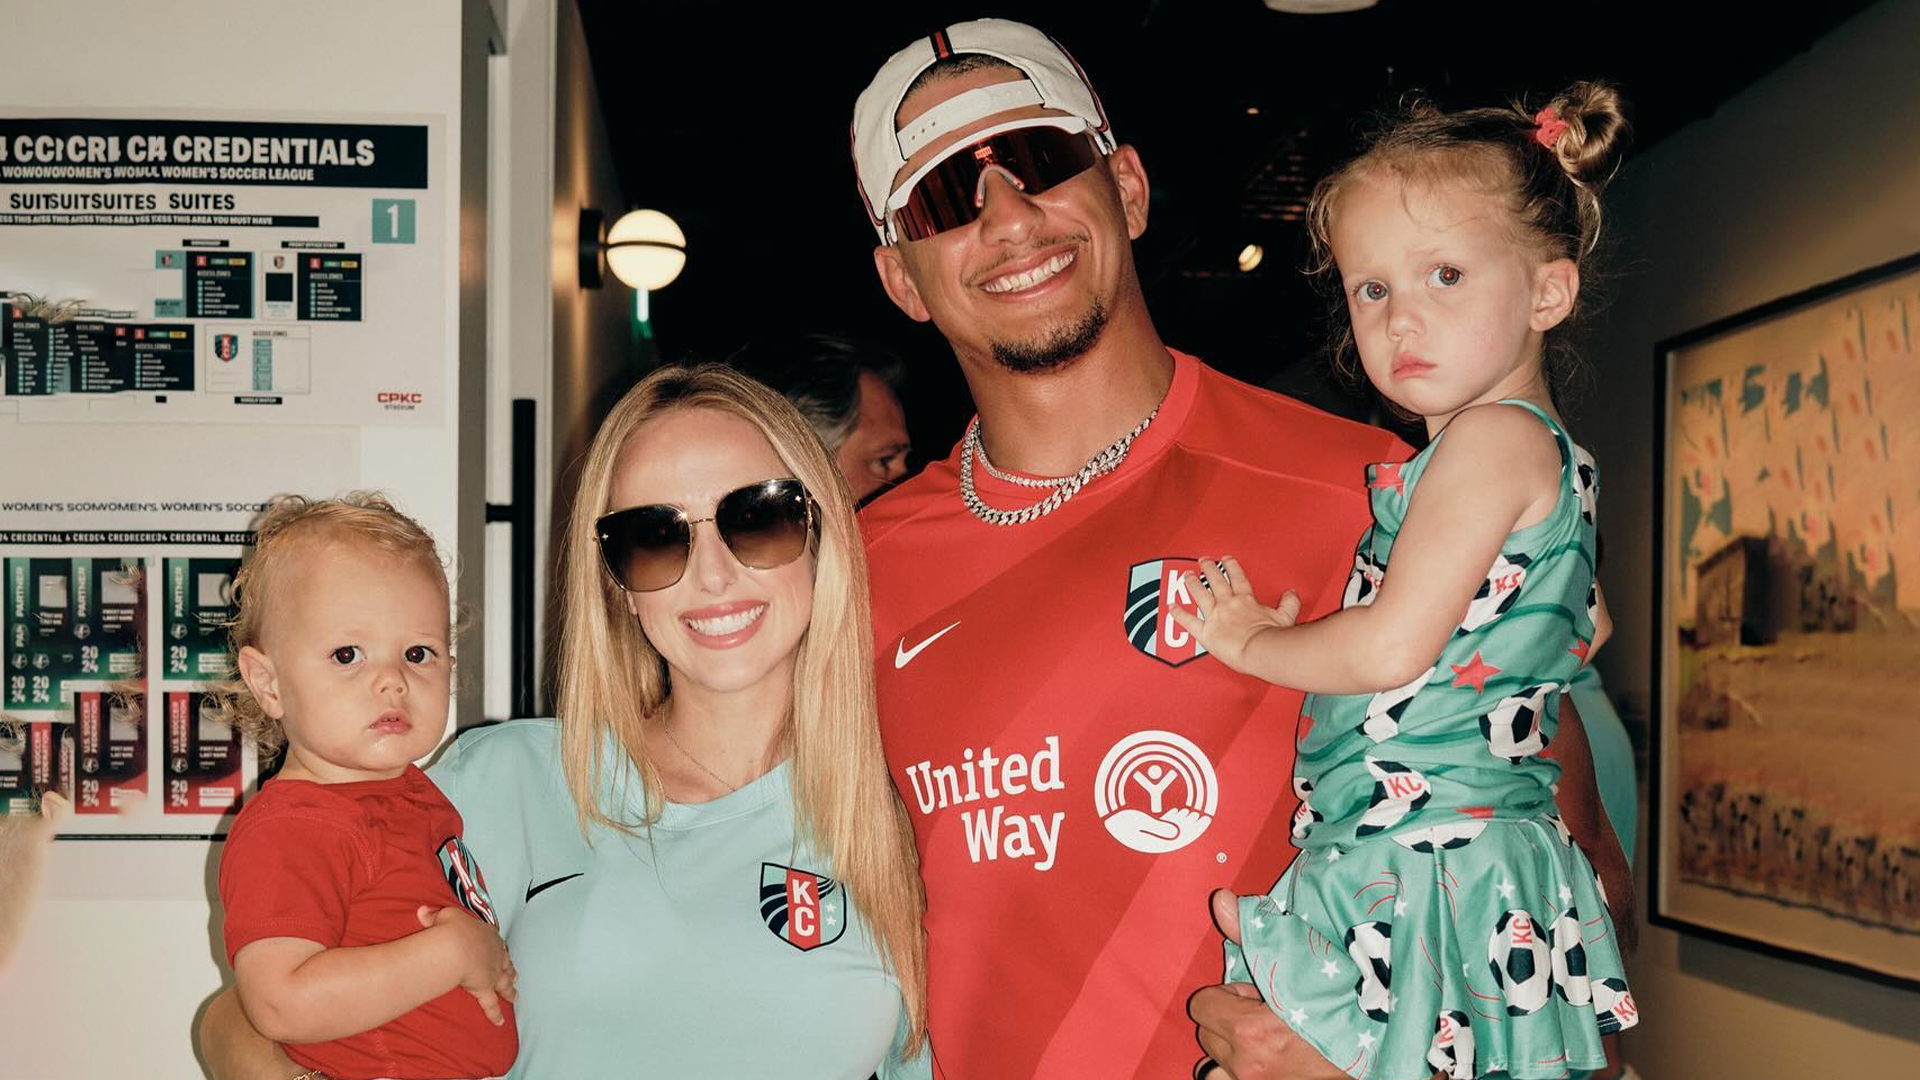 Patrick Mahomes and his wife, Brittany, had an action-packed weekend as the couple and their two kids - 18-month-old Patrick "Bronze" Lavon III, and daughter Sterling Skye, 3 - went to a Kansas City Current game